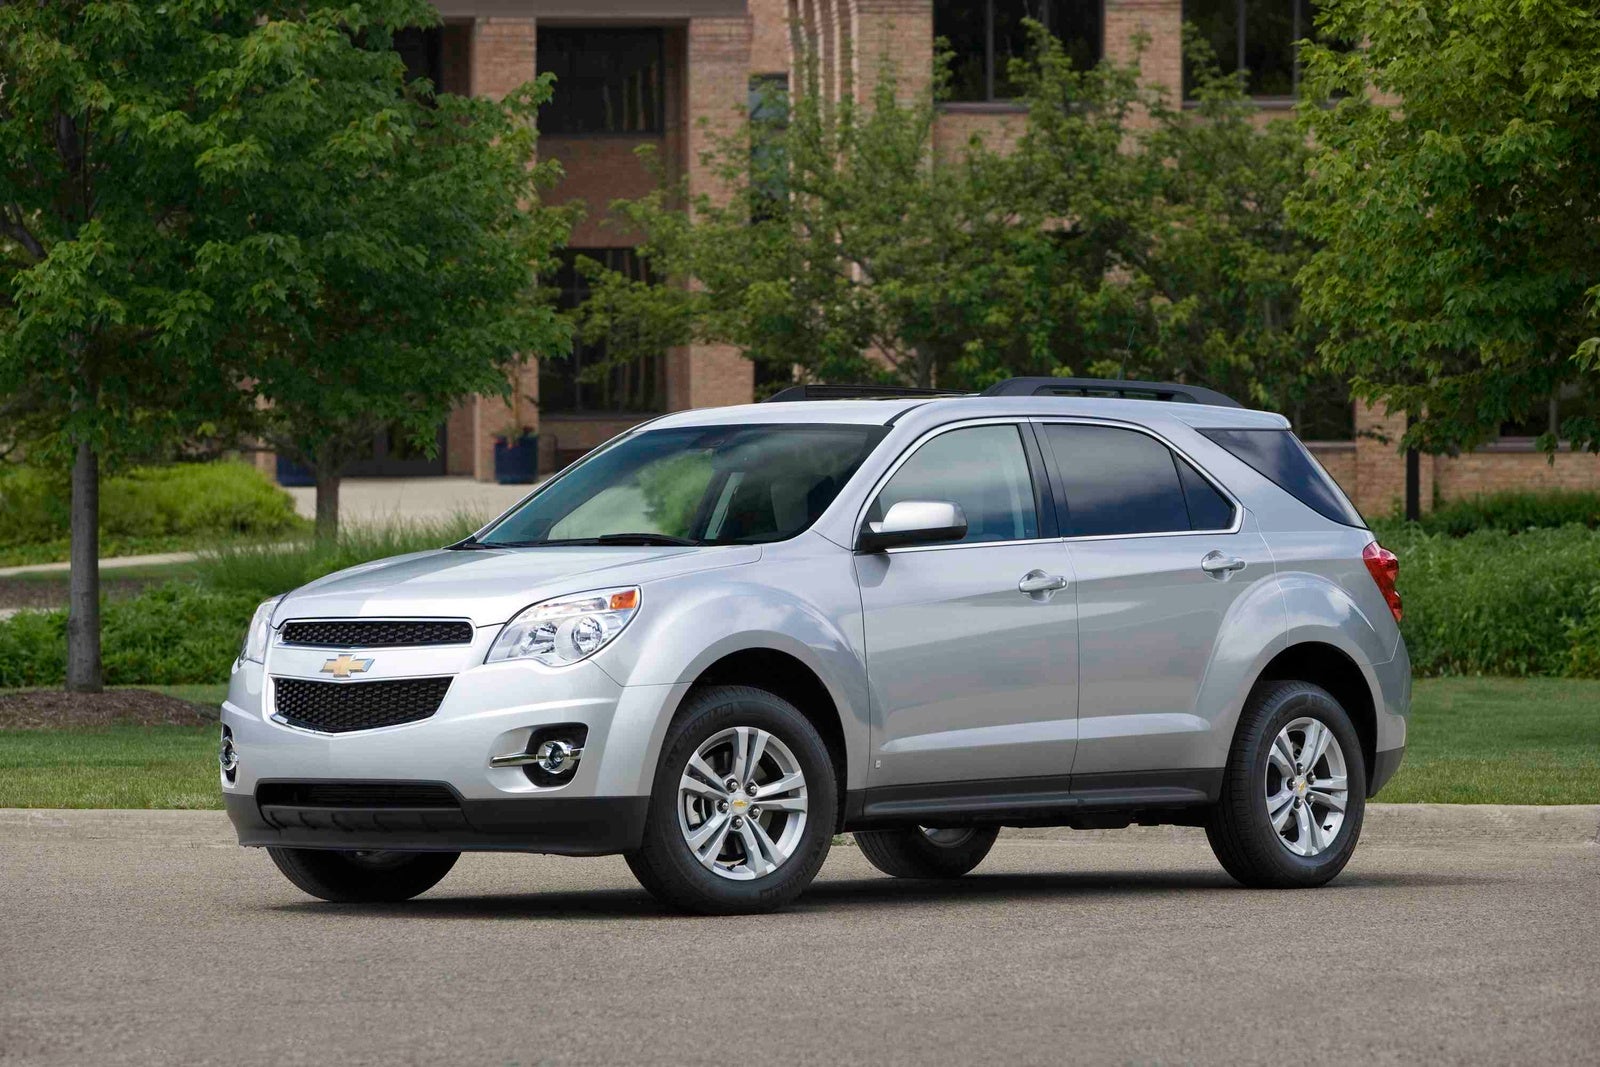 Cars Tuning: 2010 Chevrolet Equinox Pictures